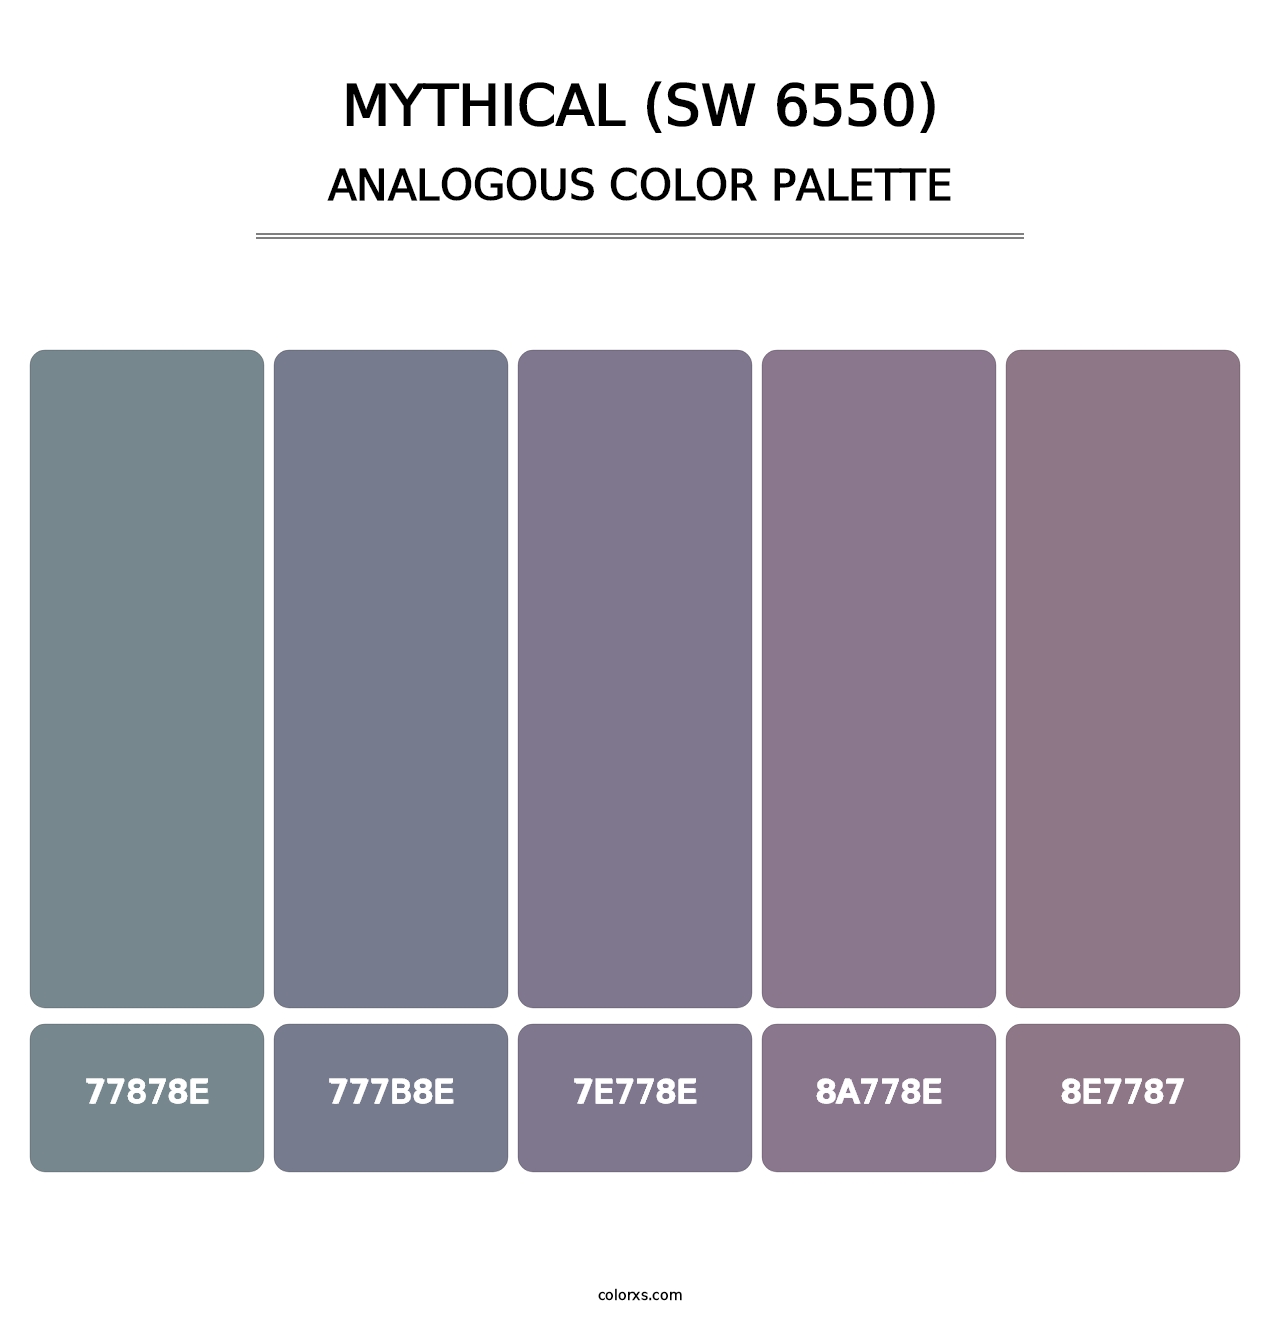 Mythical (SW 6550) - Analogous Color Palette